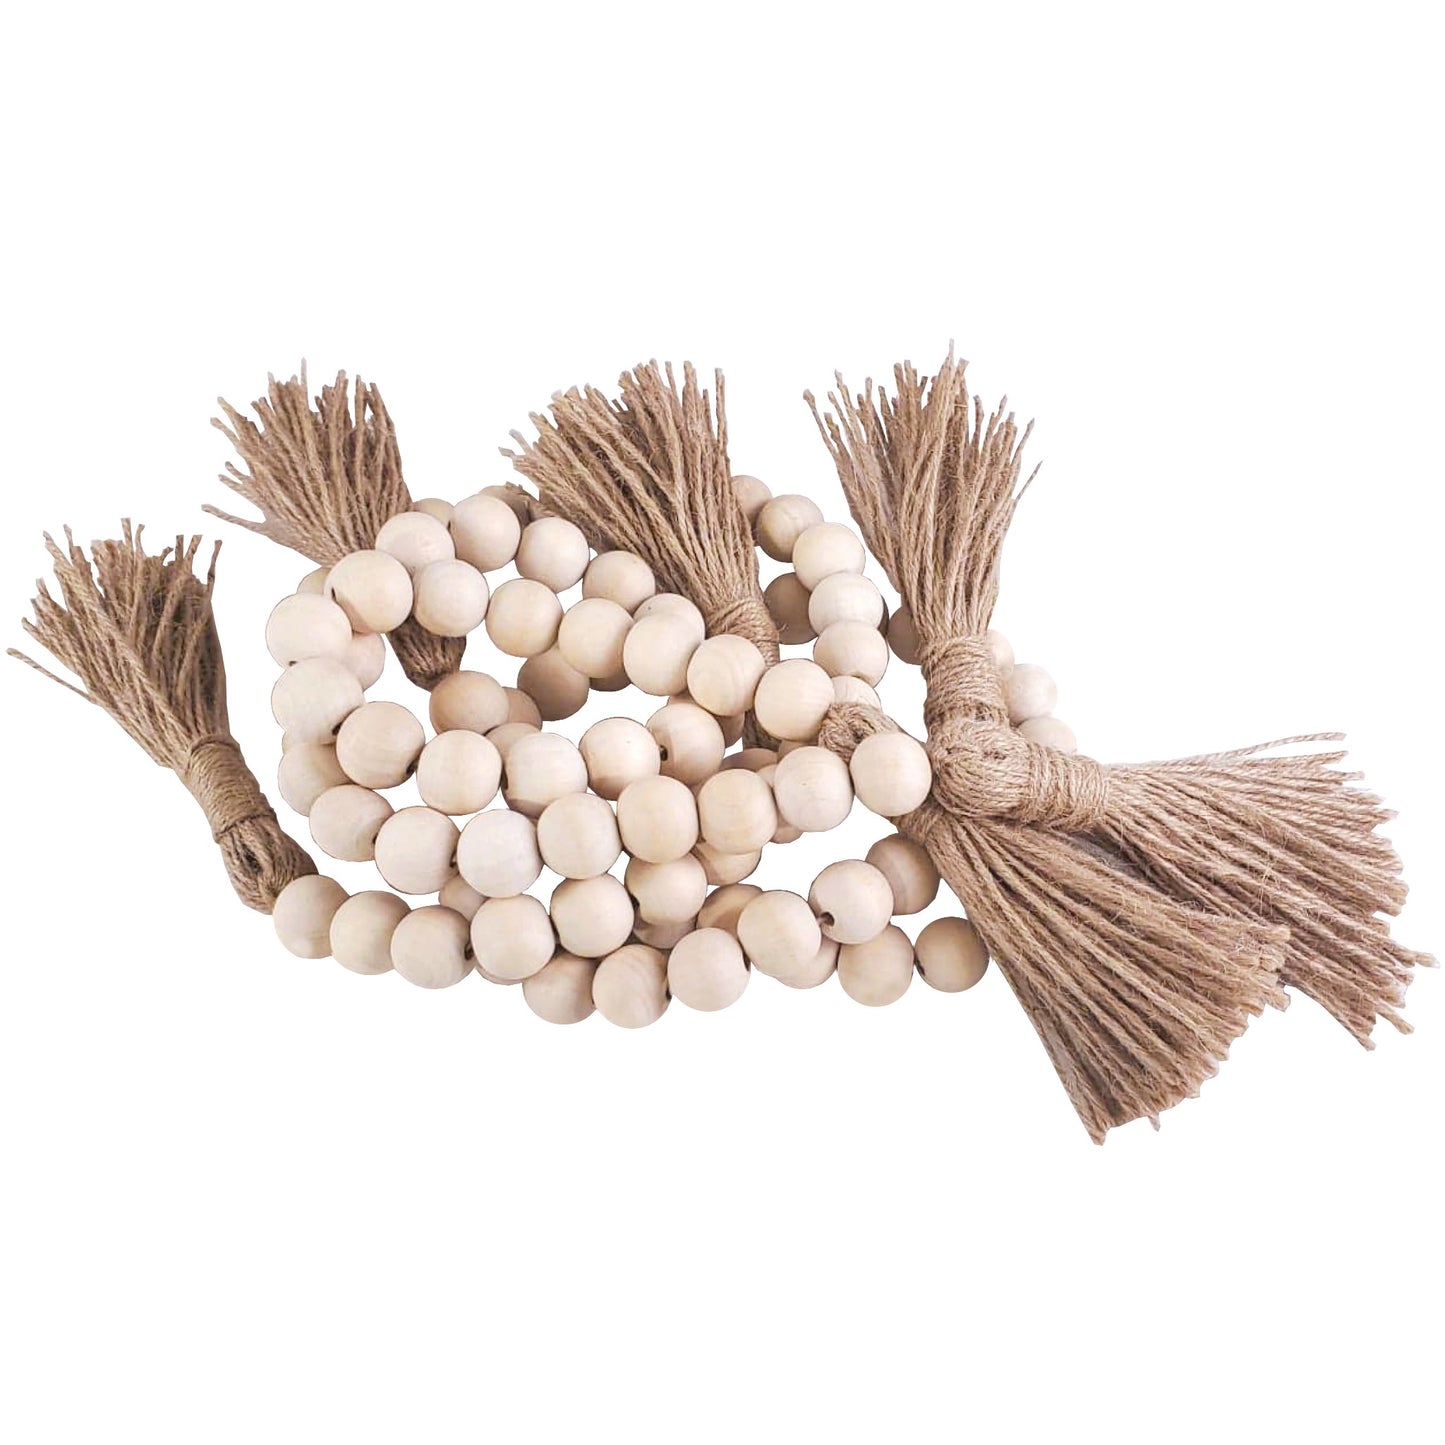 Natural Wood Bead Garland Strand - For Use With Tiered Trays Or Other Home Decor